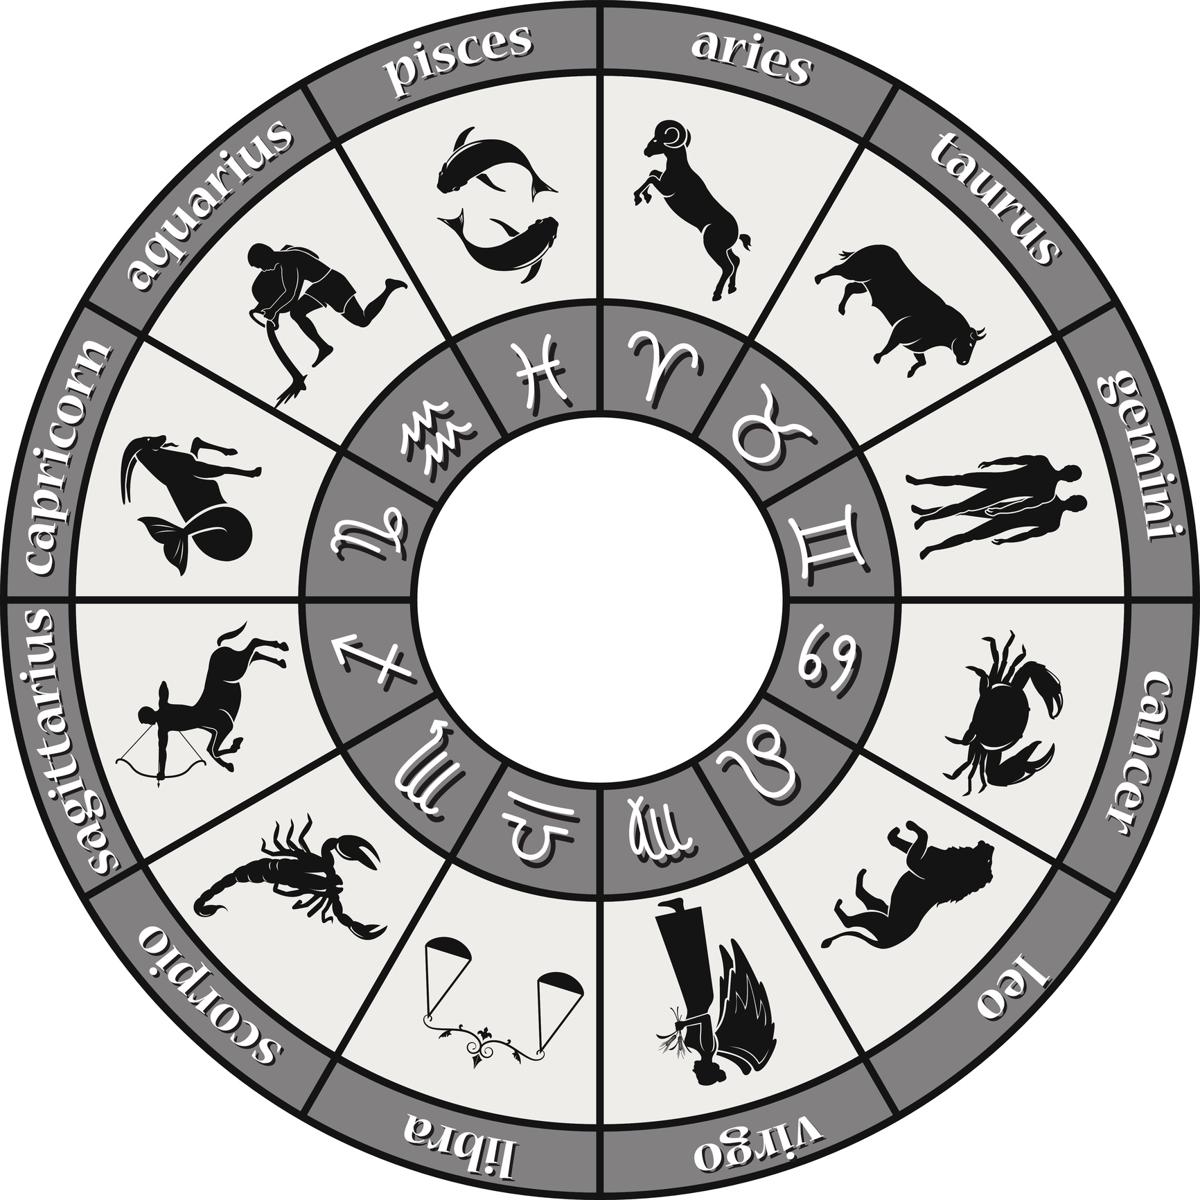 An Elaborate Explanation of Zodiac Signs and Their Meanings